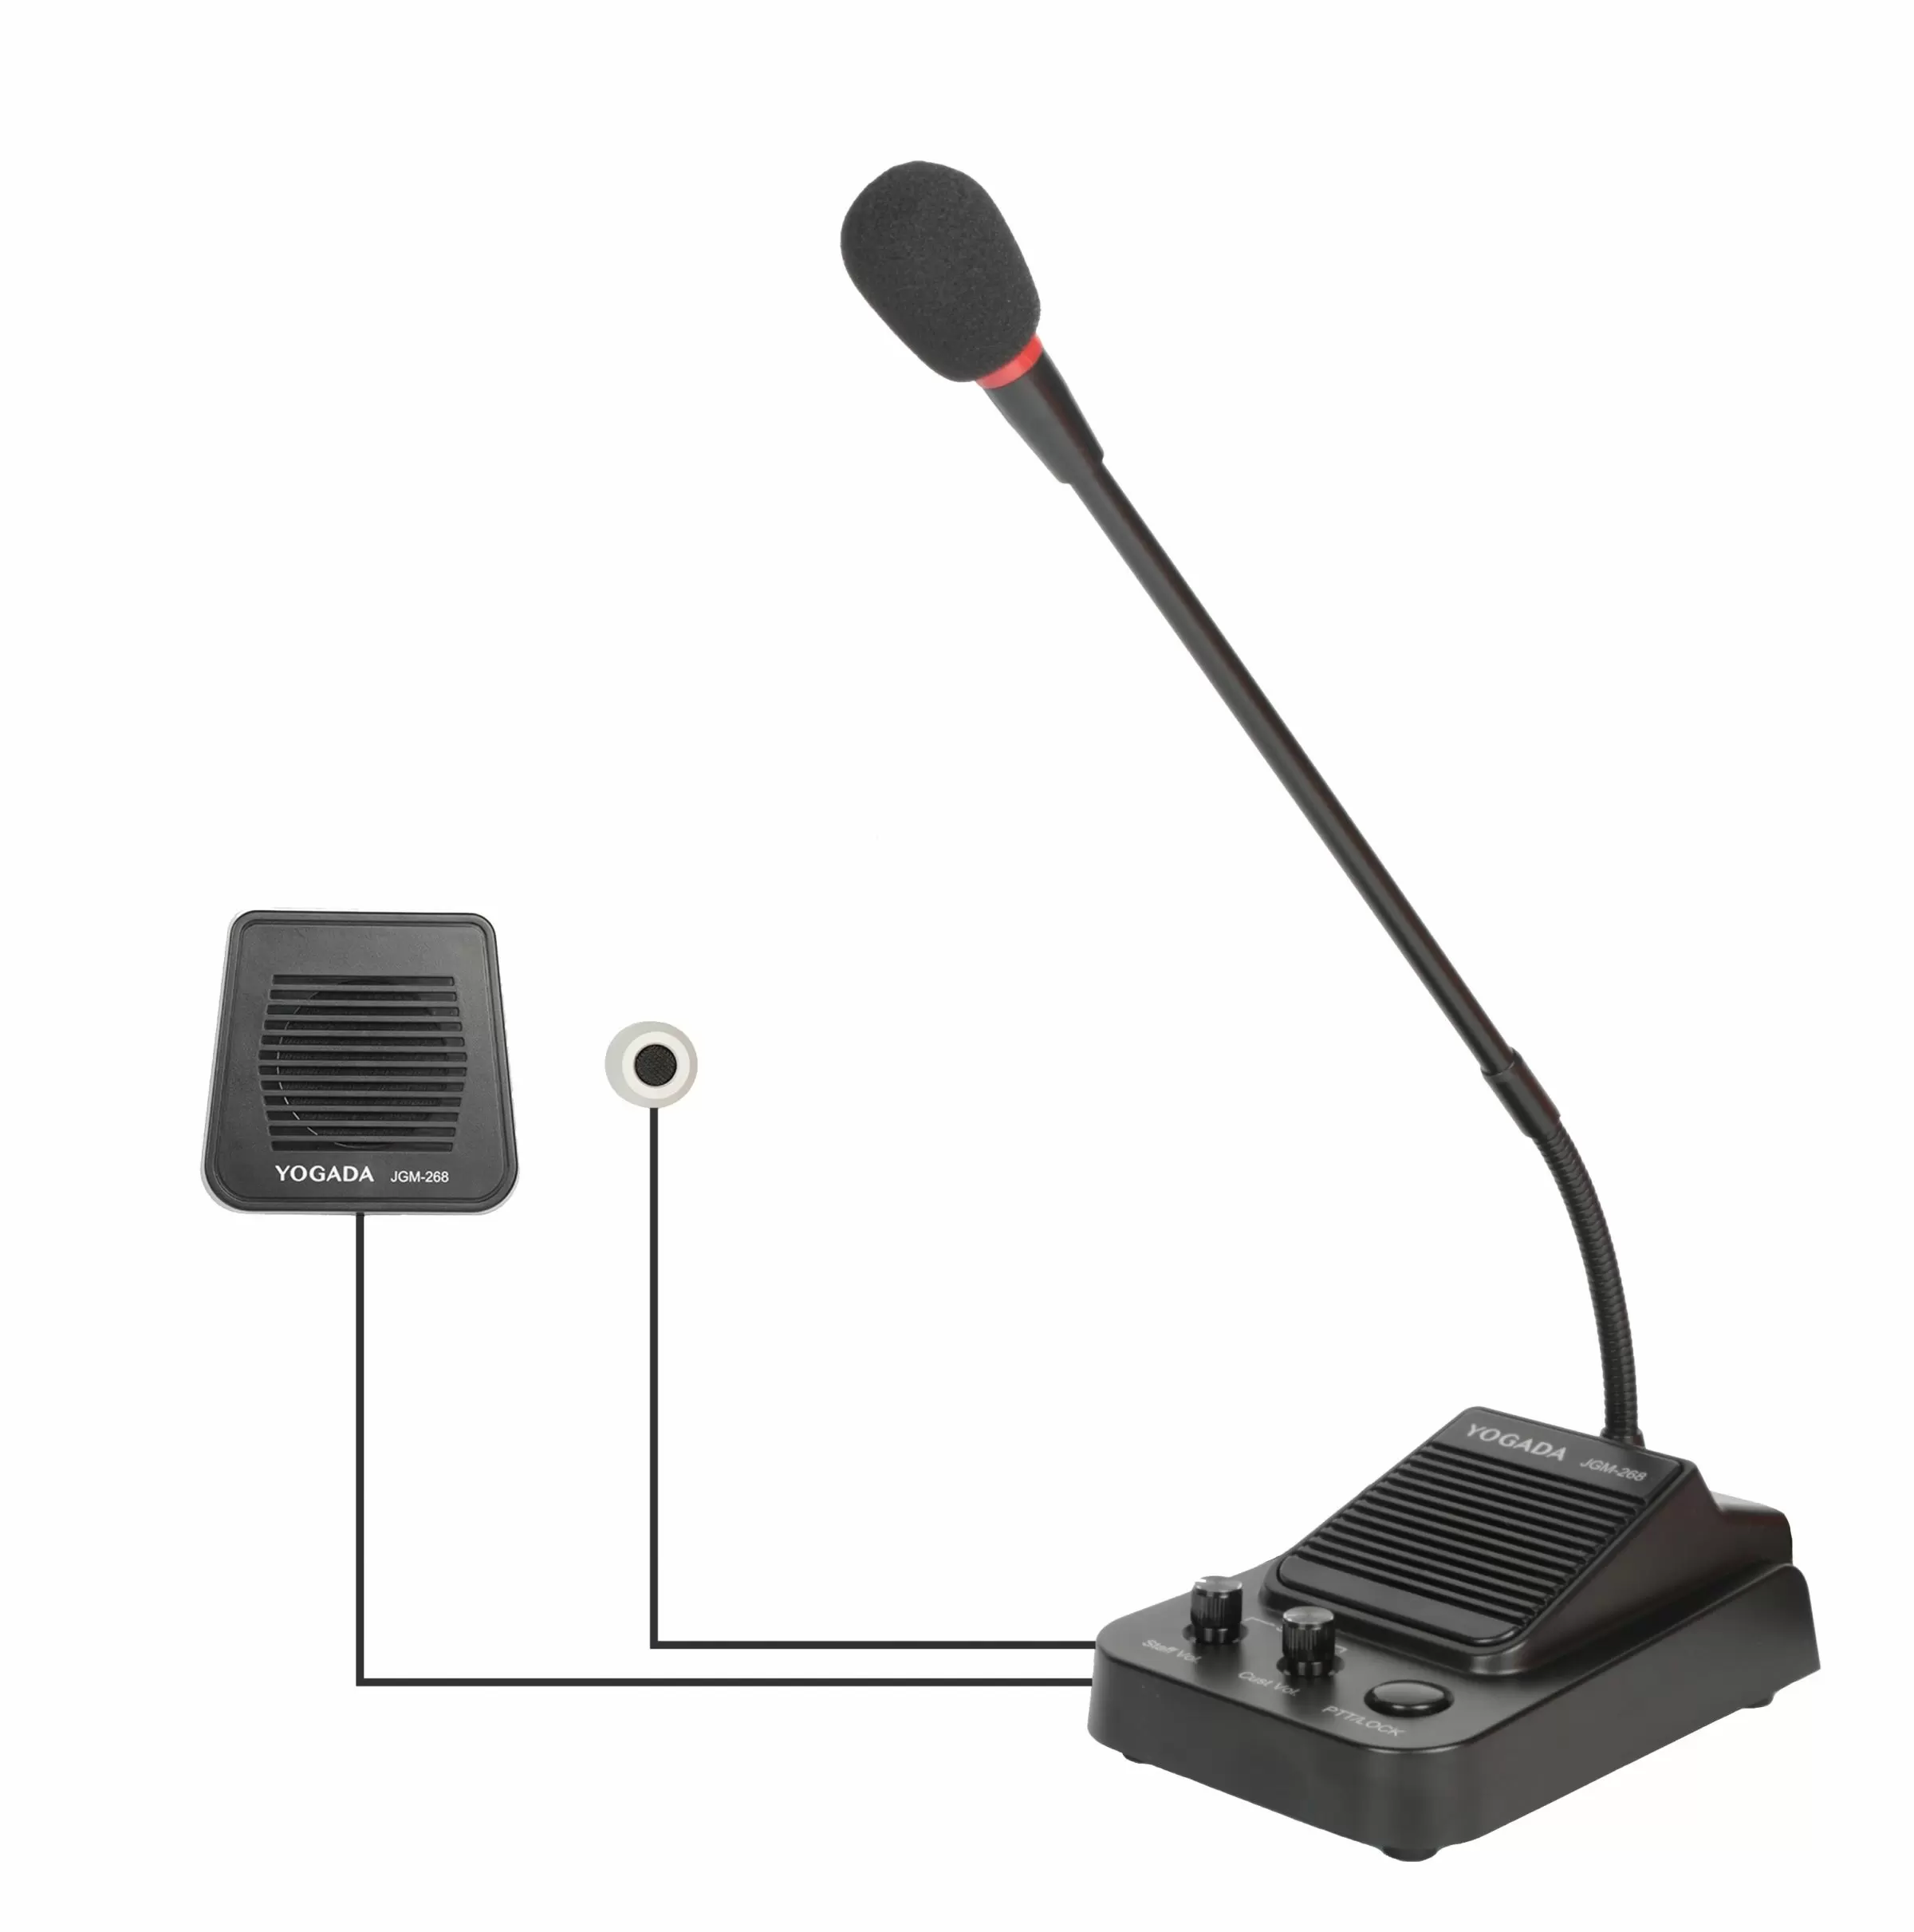 Easy to be installed Two-way Intercom Microphone System - Two-way Intercom Microphone for ticket booth, counter, bank security or other similar application